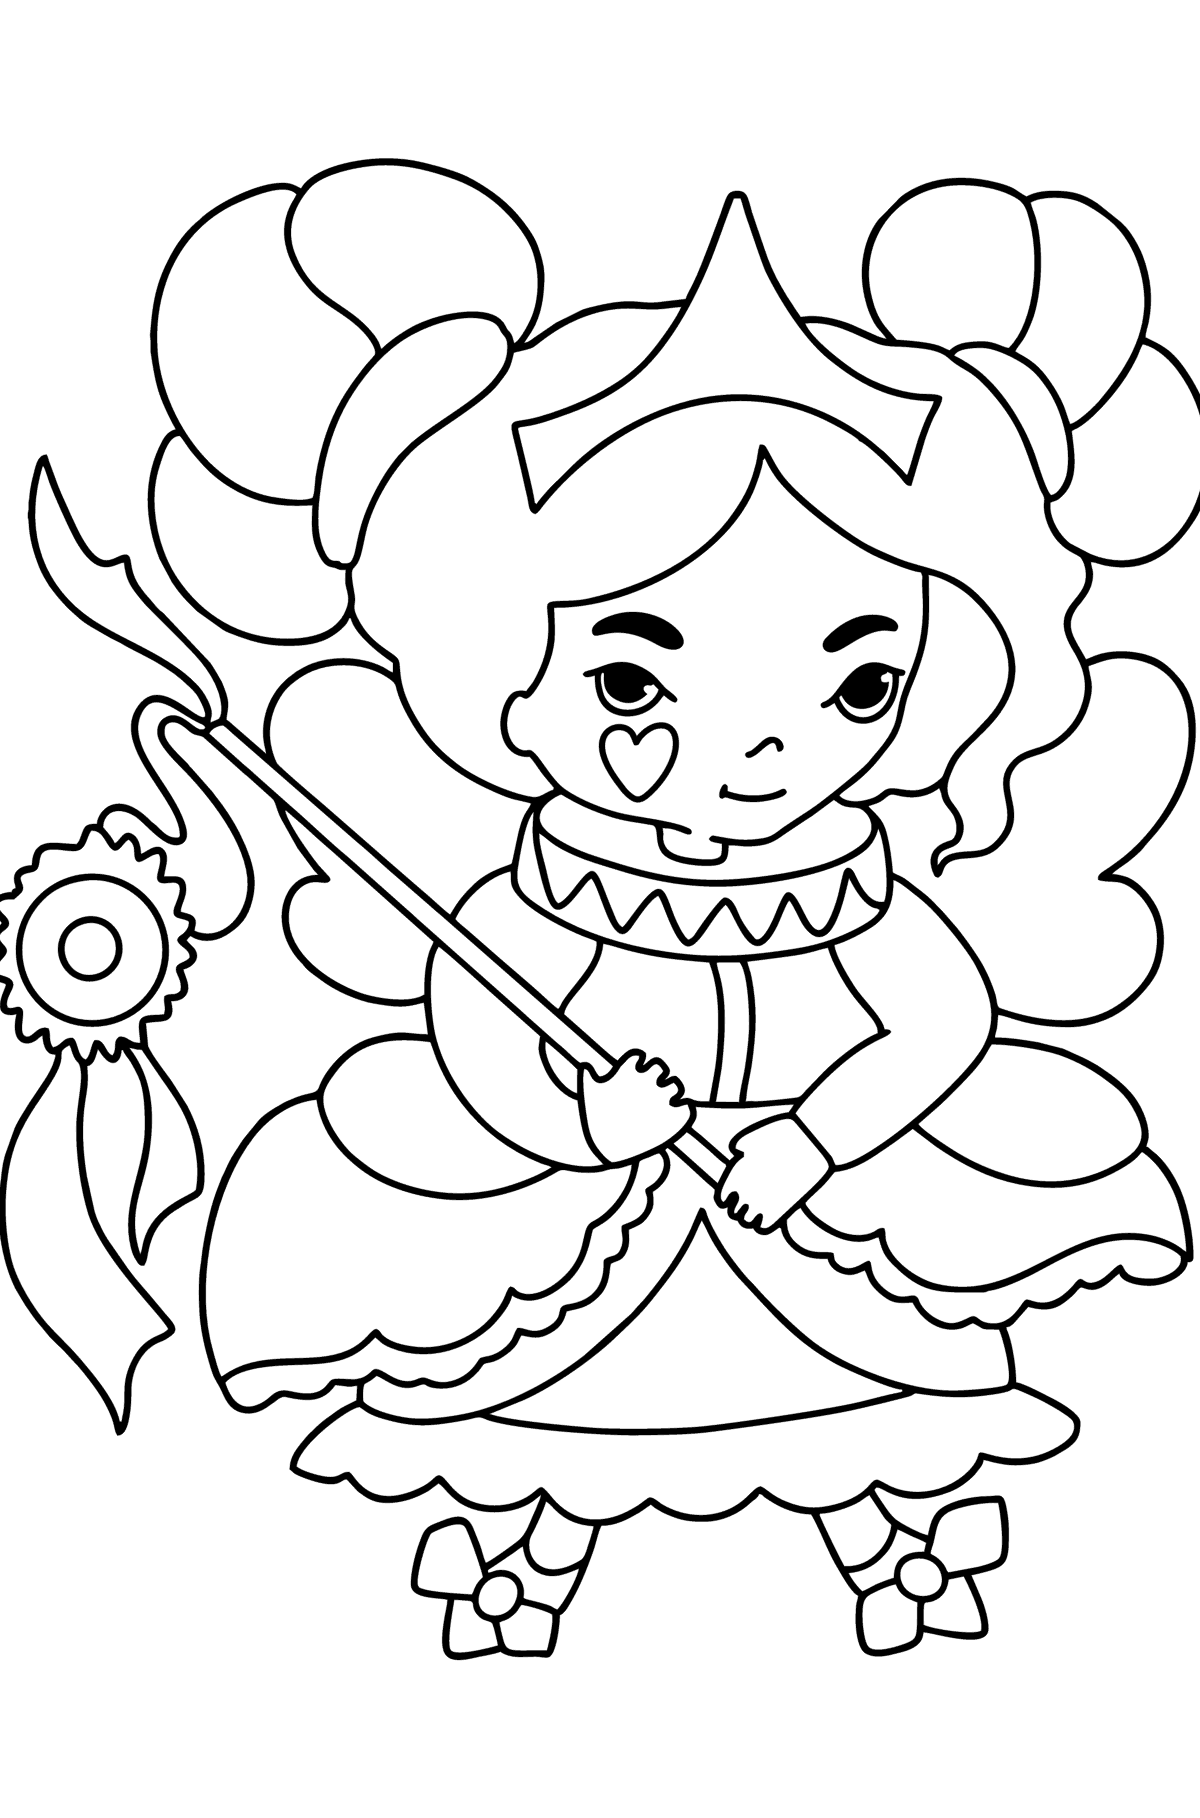 Fairy in a beautiful dress coloring page - Coloring Pages for Kids